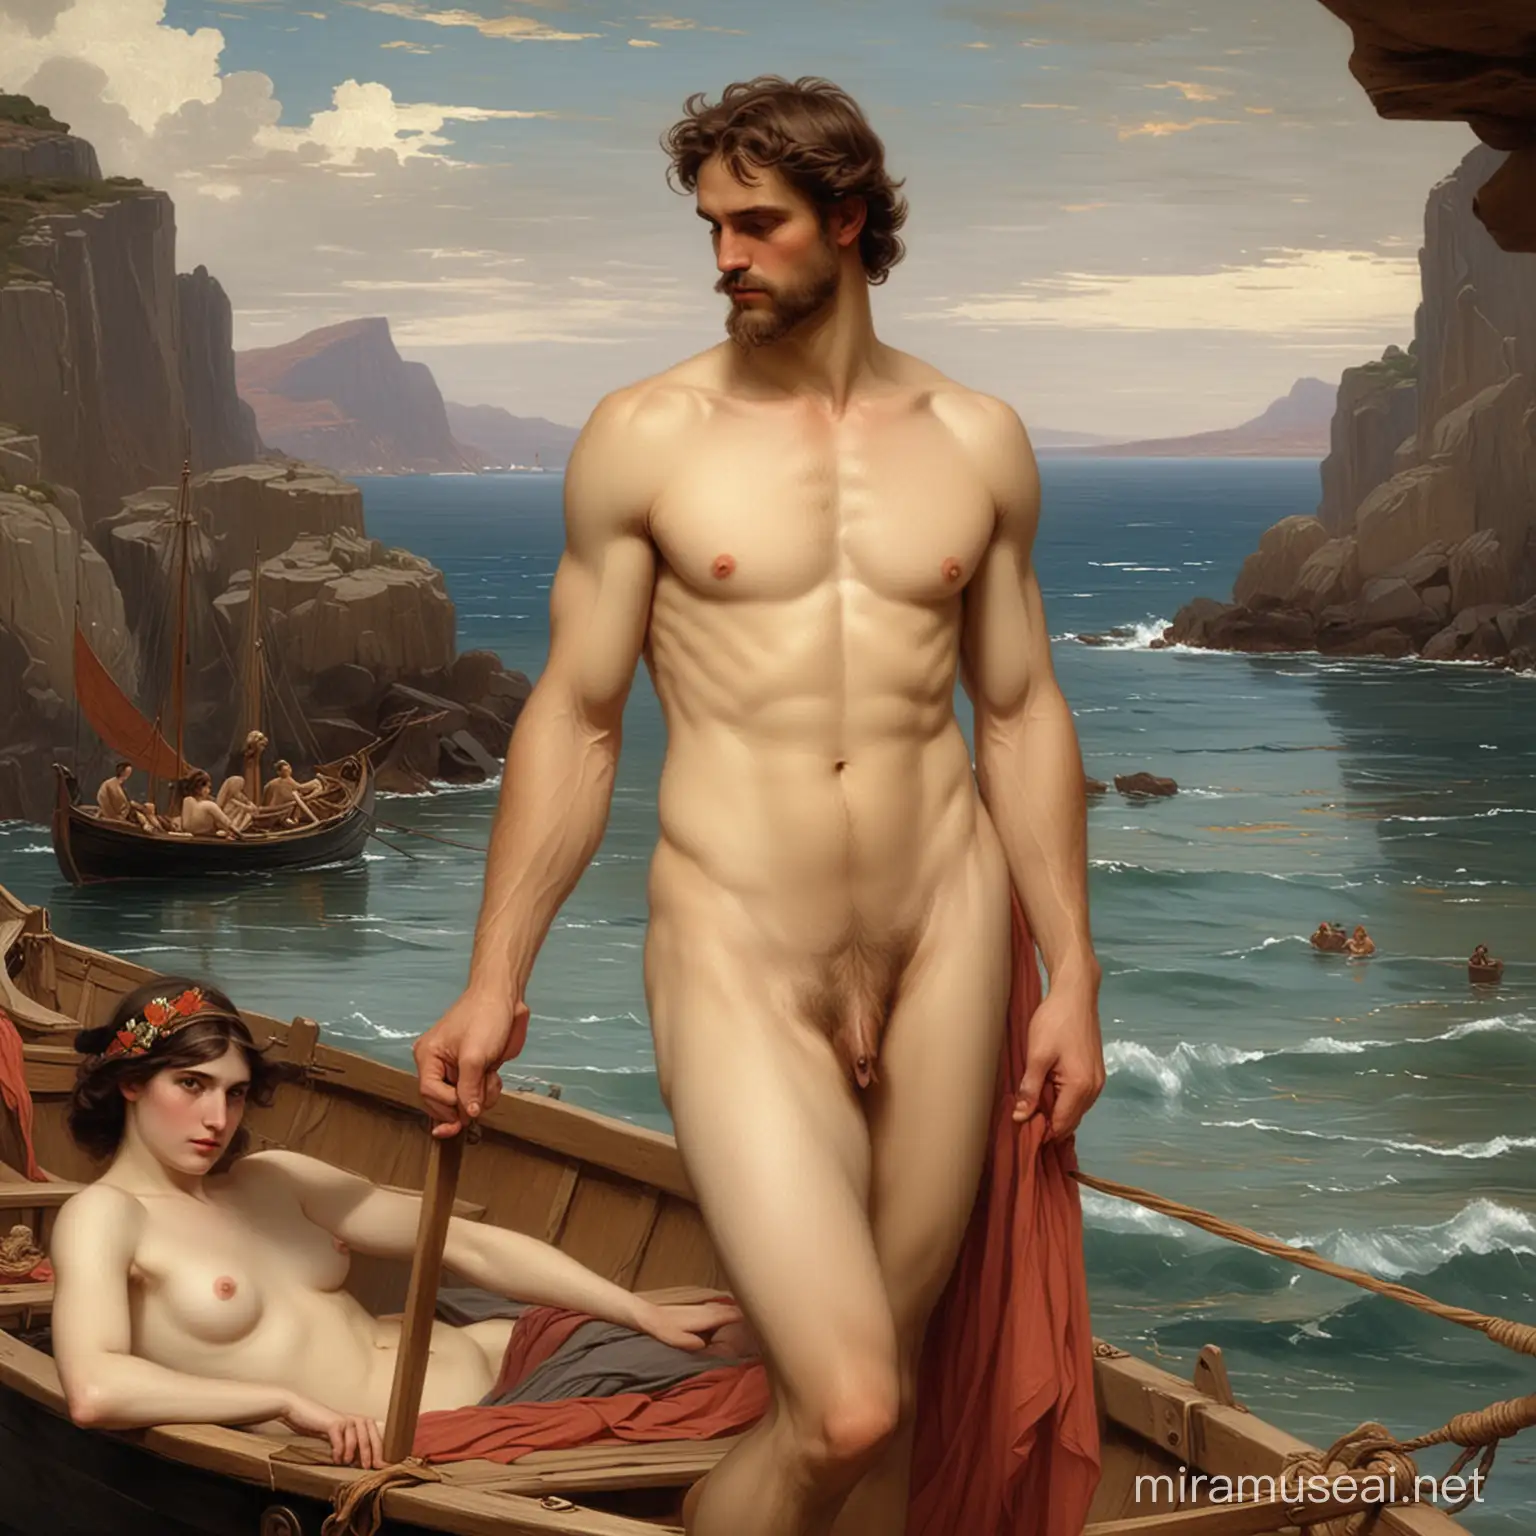 the handsome Odysseus leaving the nude muse Calypso, envisioned in the artistic style of the renowned British painter, Sir John William Waterhouse